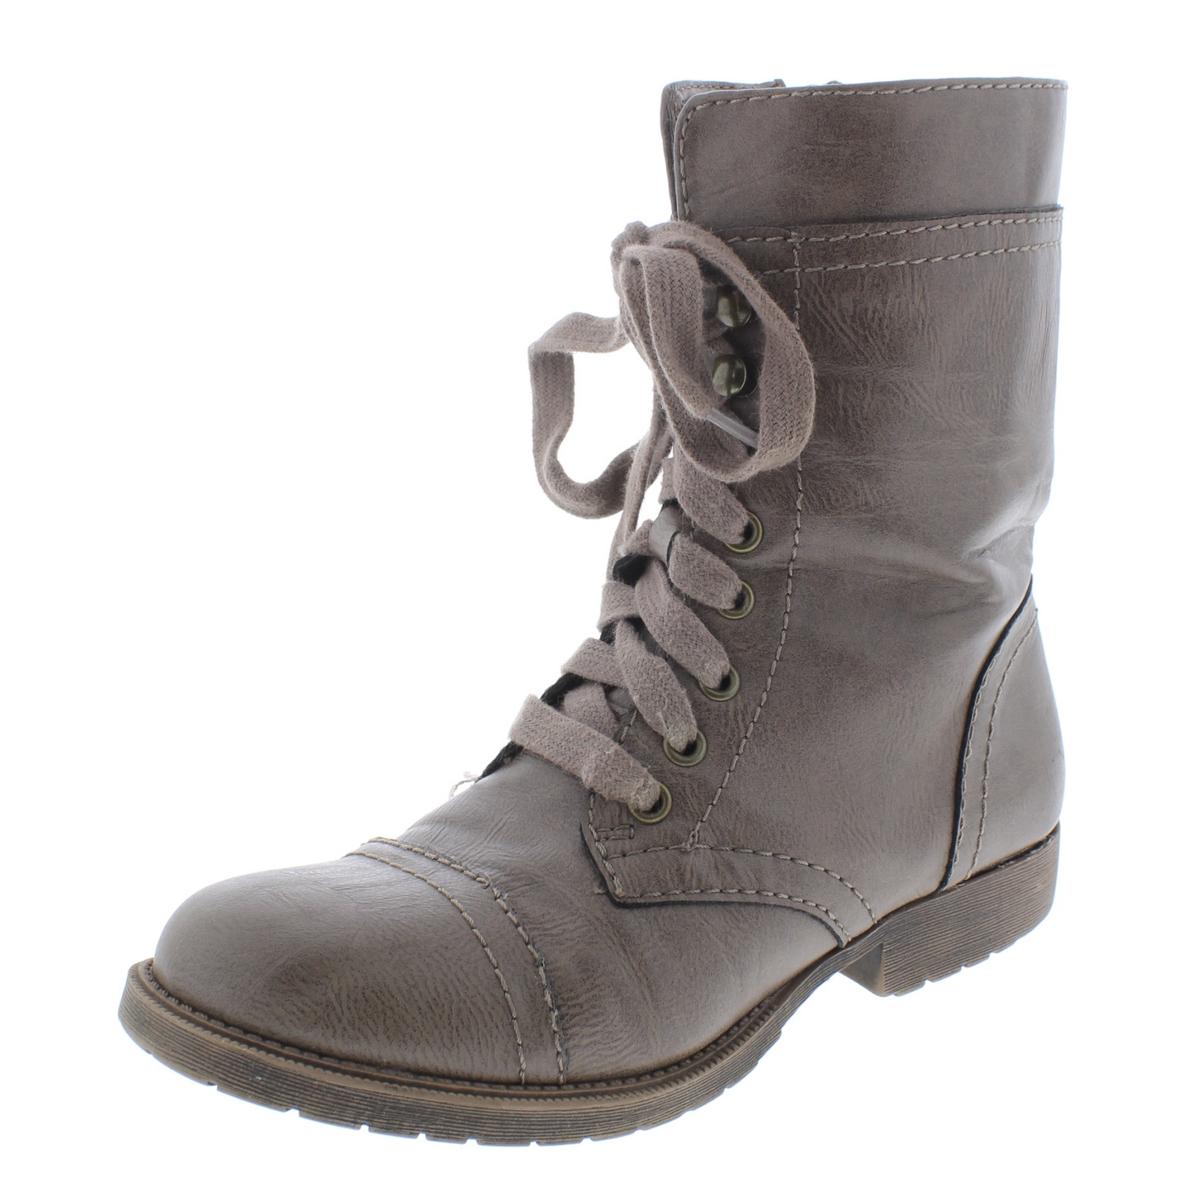 Rampage Womens Jeliana Taupe Ankle Combat Boots Shoes 7 Medium (B,M ...